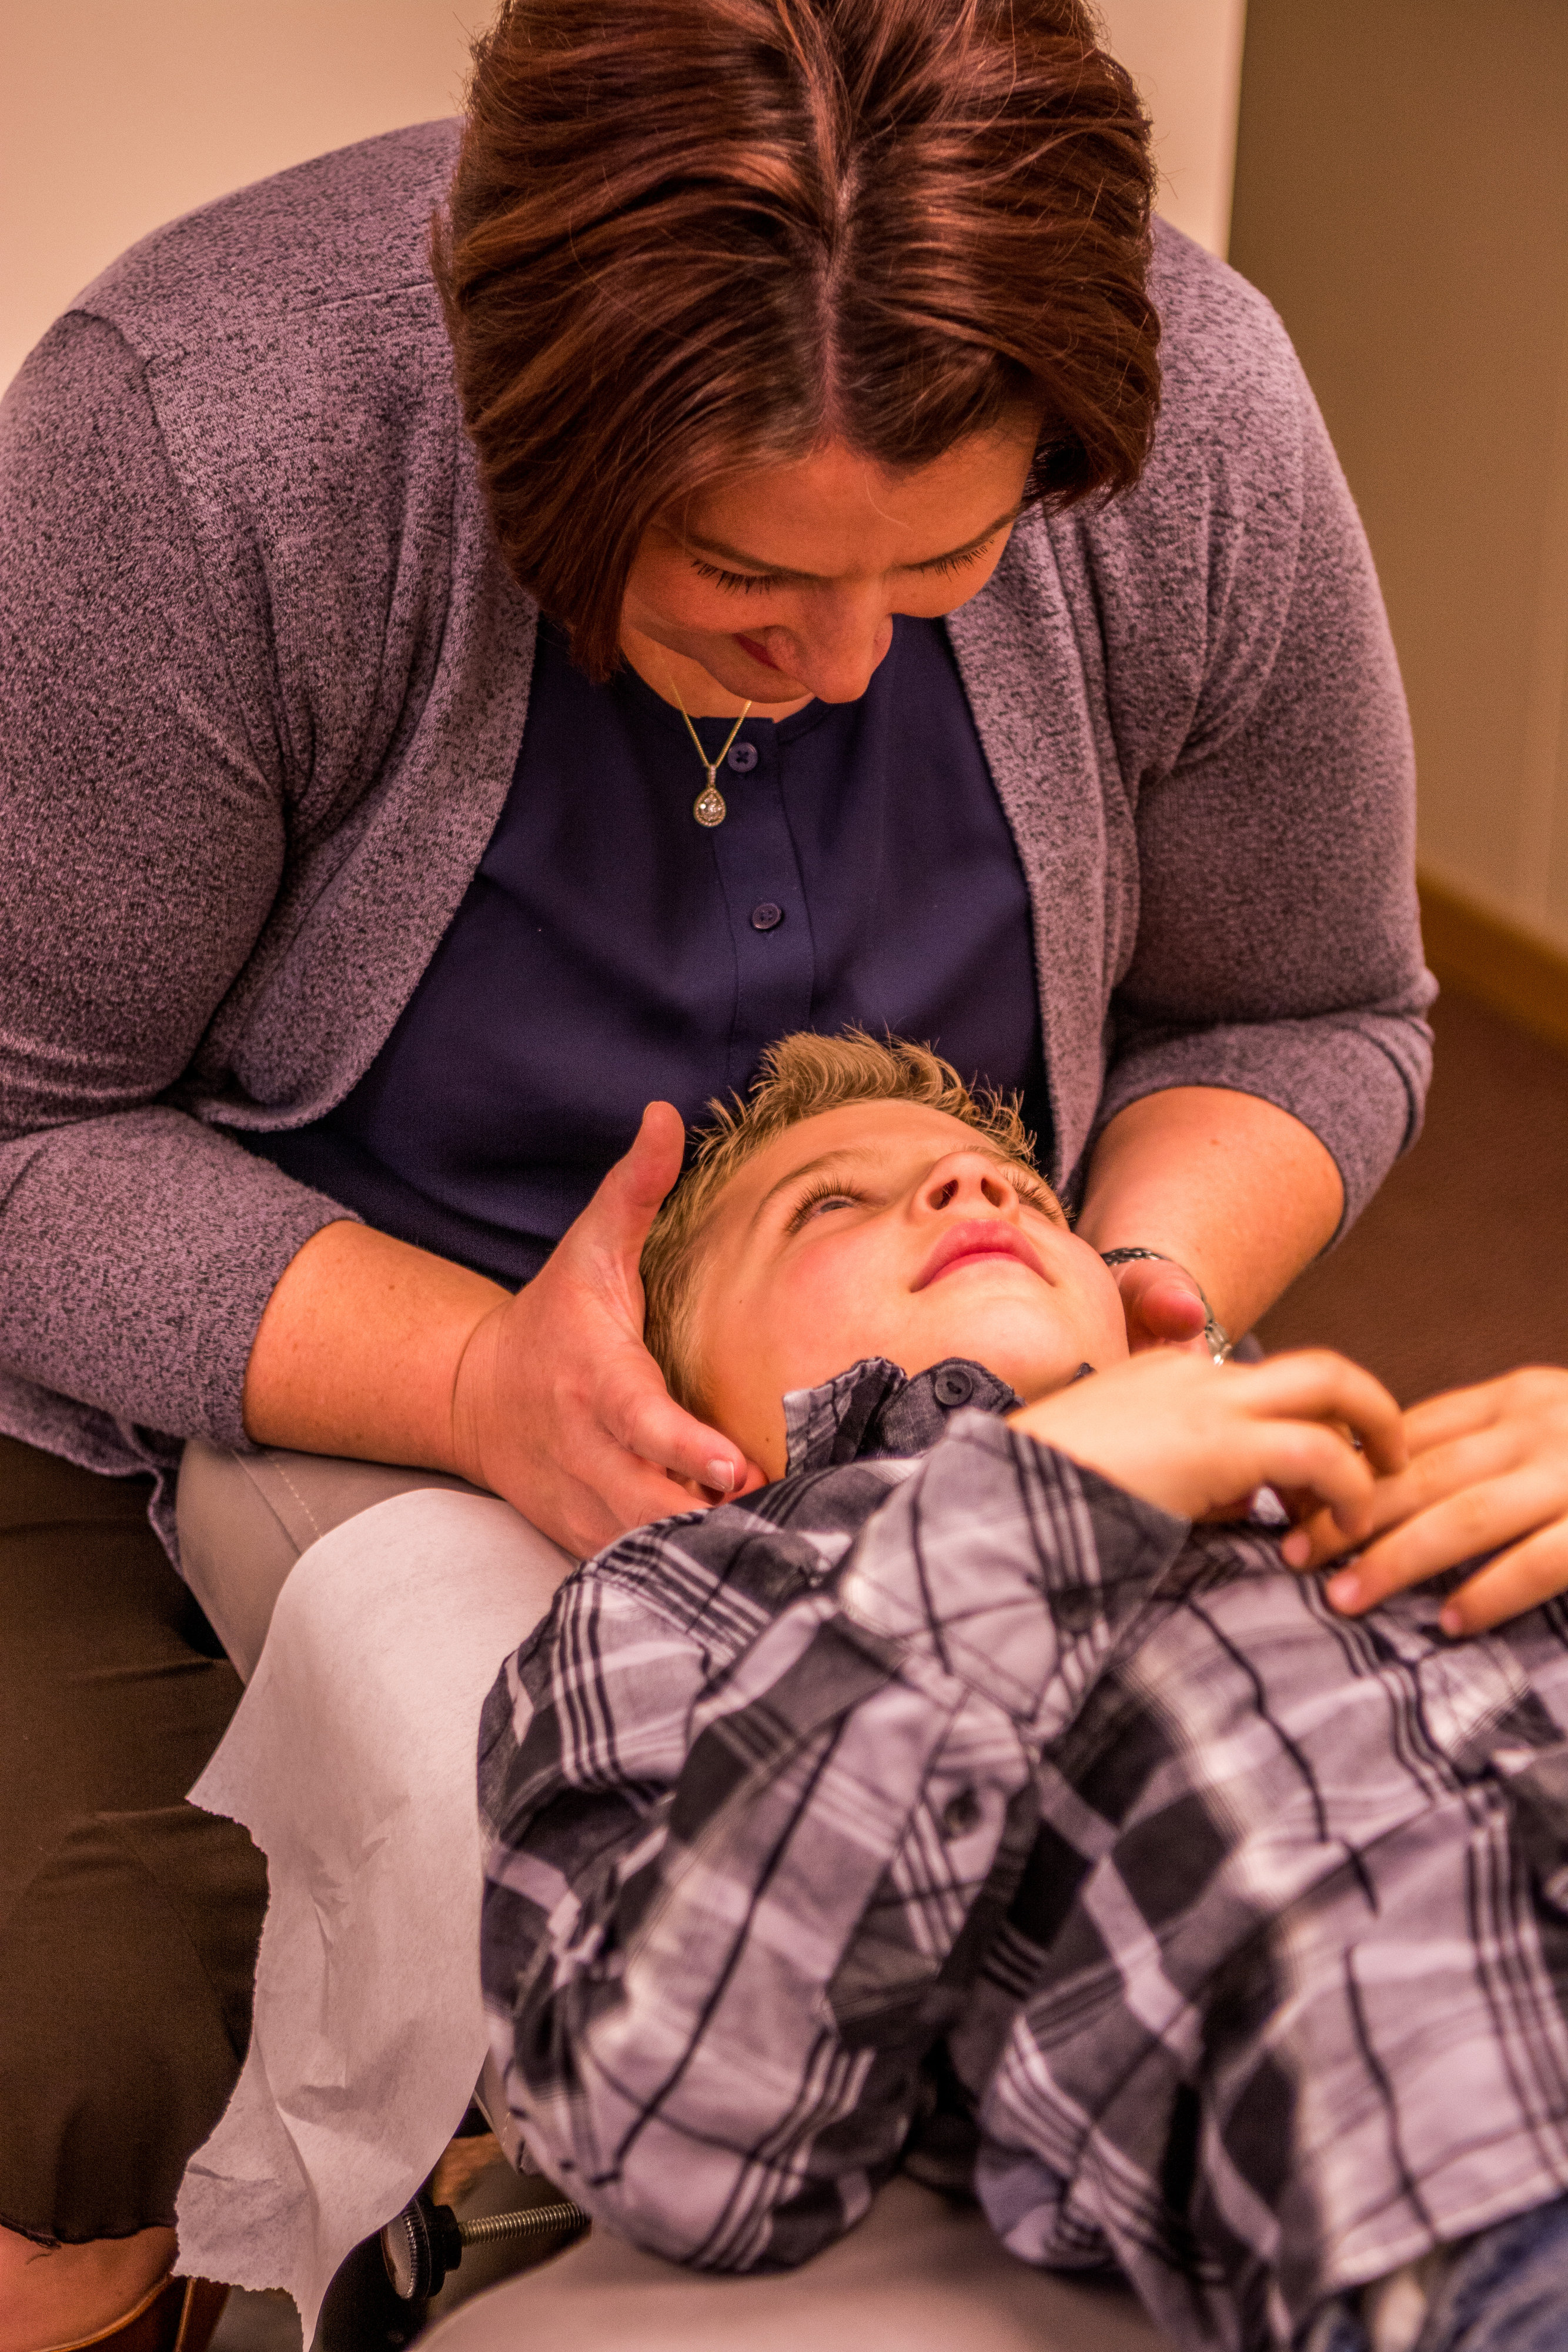 View More: http://dlindhardtphotography.pass.us/family-first-chiropractic